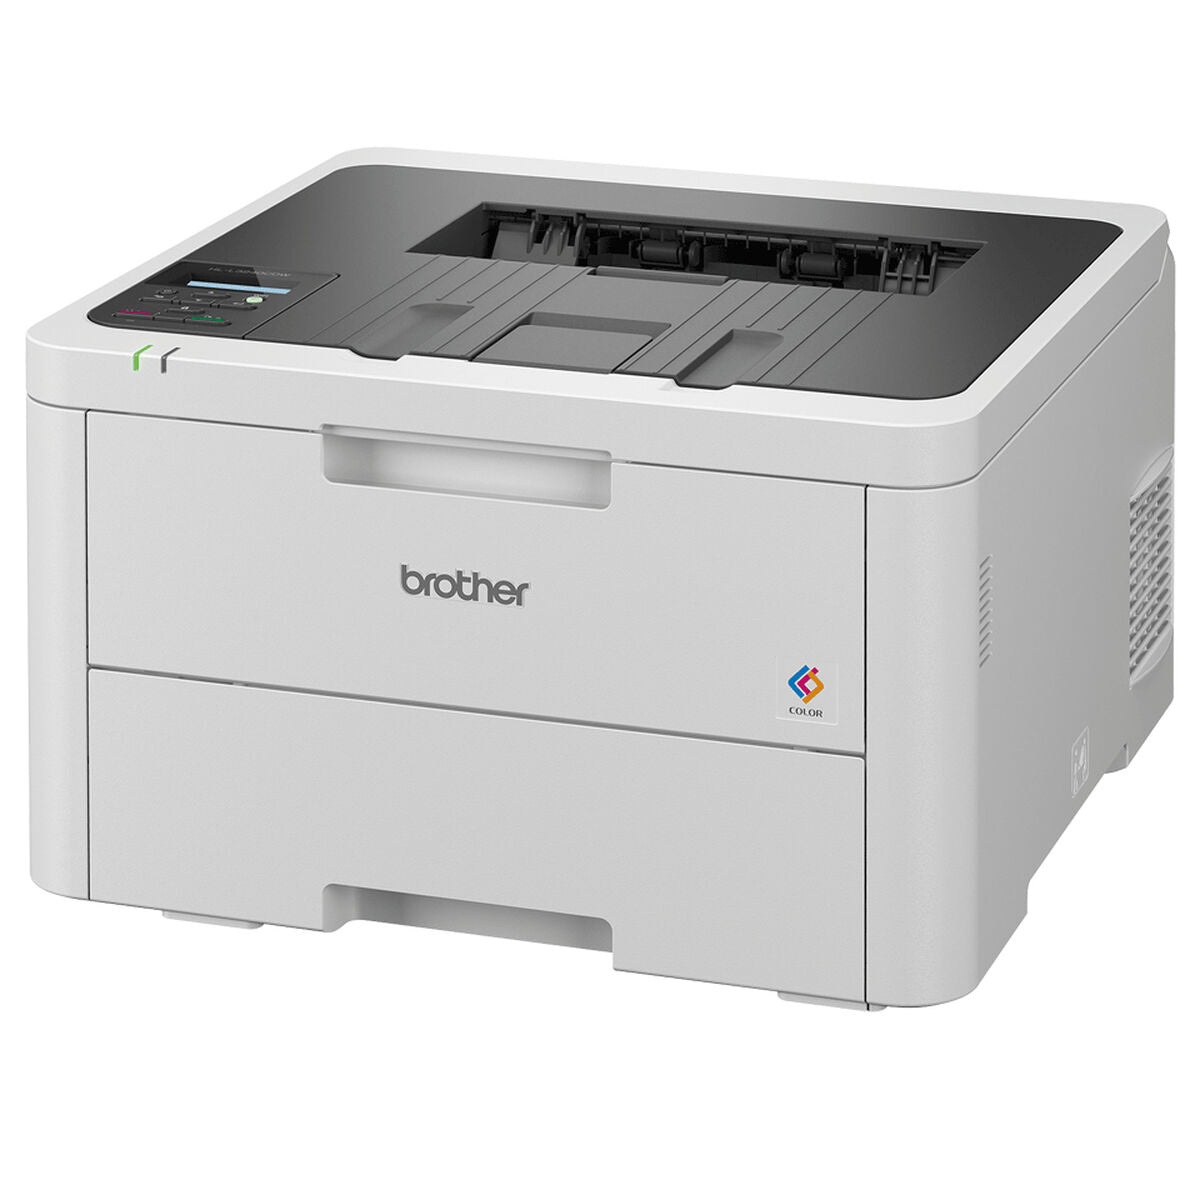 Laser Printer Brother HLL3240CDWRE1, Brother, Computing, Printers and accessories, laser-printer-brother-hll3240cdwre1, :Laser Printer, Brand_Brother, category-reference-2609, category-reference-2642, category-reference-2645, category-reference-t-19685, category-reference-t-19911, category-reference-t-21378, category-reference-t-25690, computers / peripherals, Condition_NEW, office, Price_200 - 300, Teleworking, RiotNook